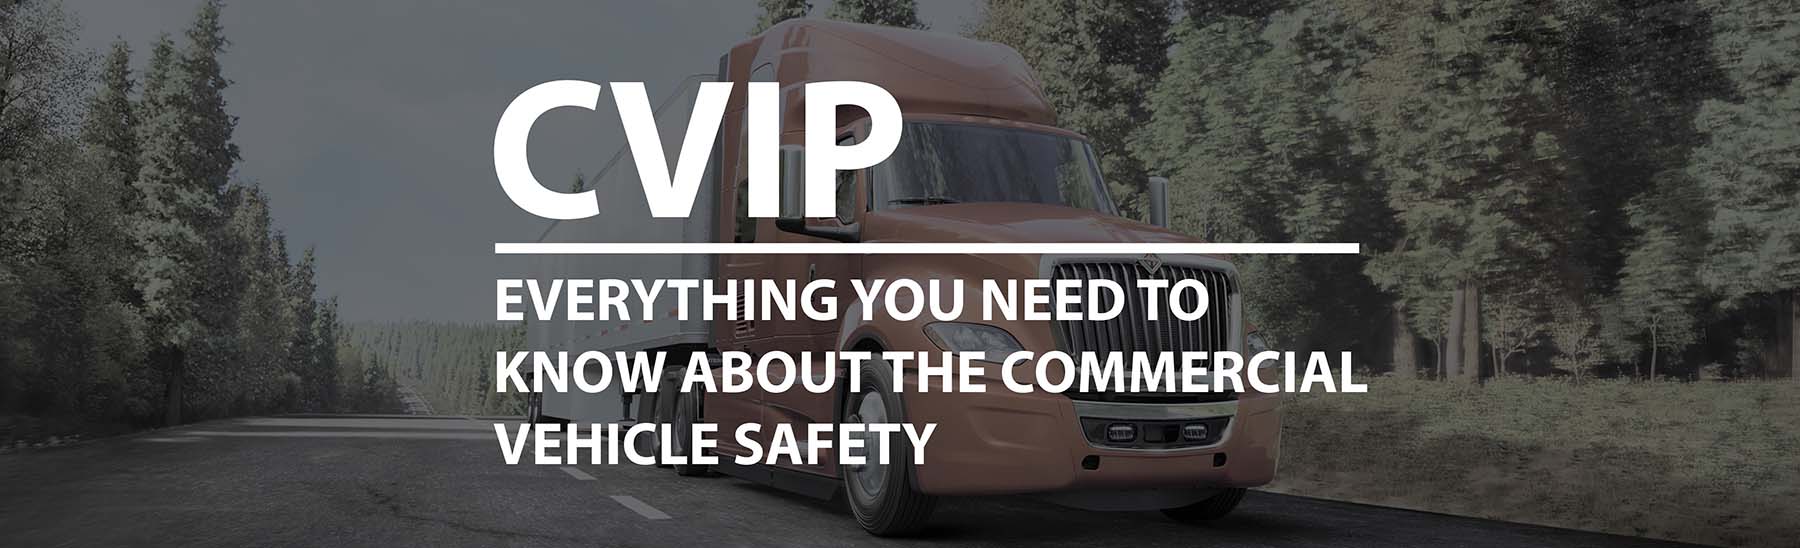 Everything you need to know about the commercial vehicle safety